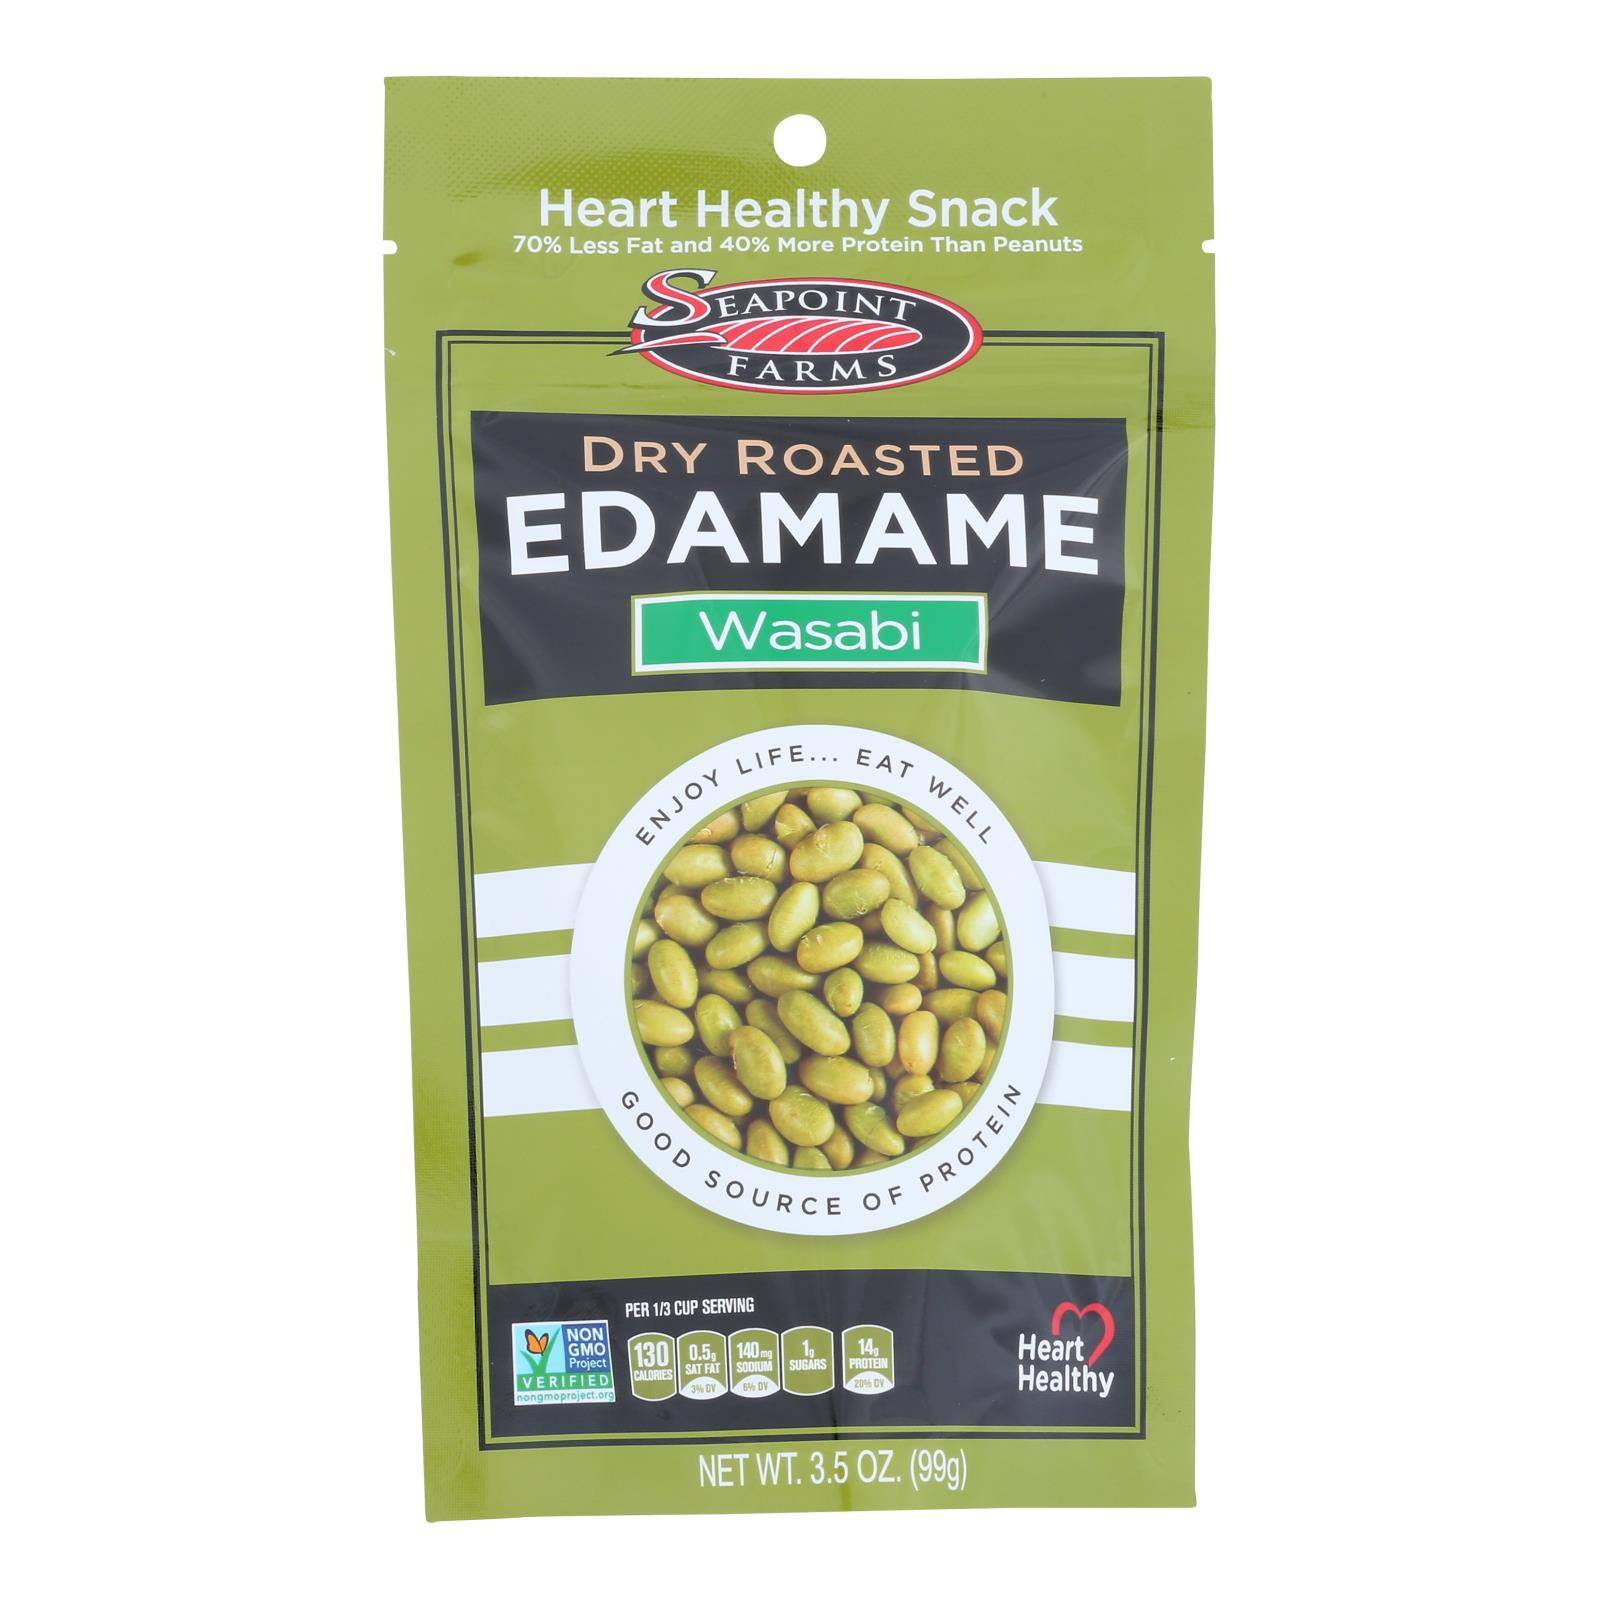 Buy Seapoint Farms Dry Roasted Edamame - Spicy Wasabi - Case Of 12 - 3.5 Oz.  at OnlyNaturals.us